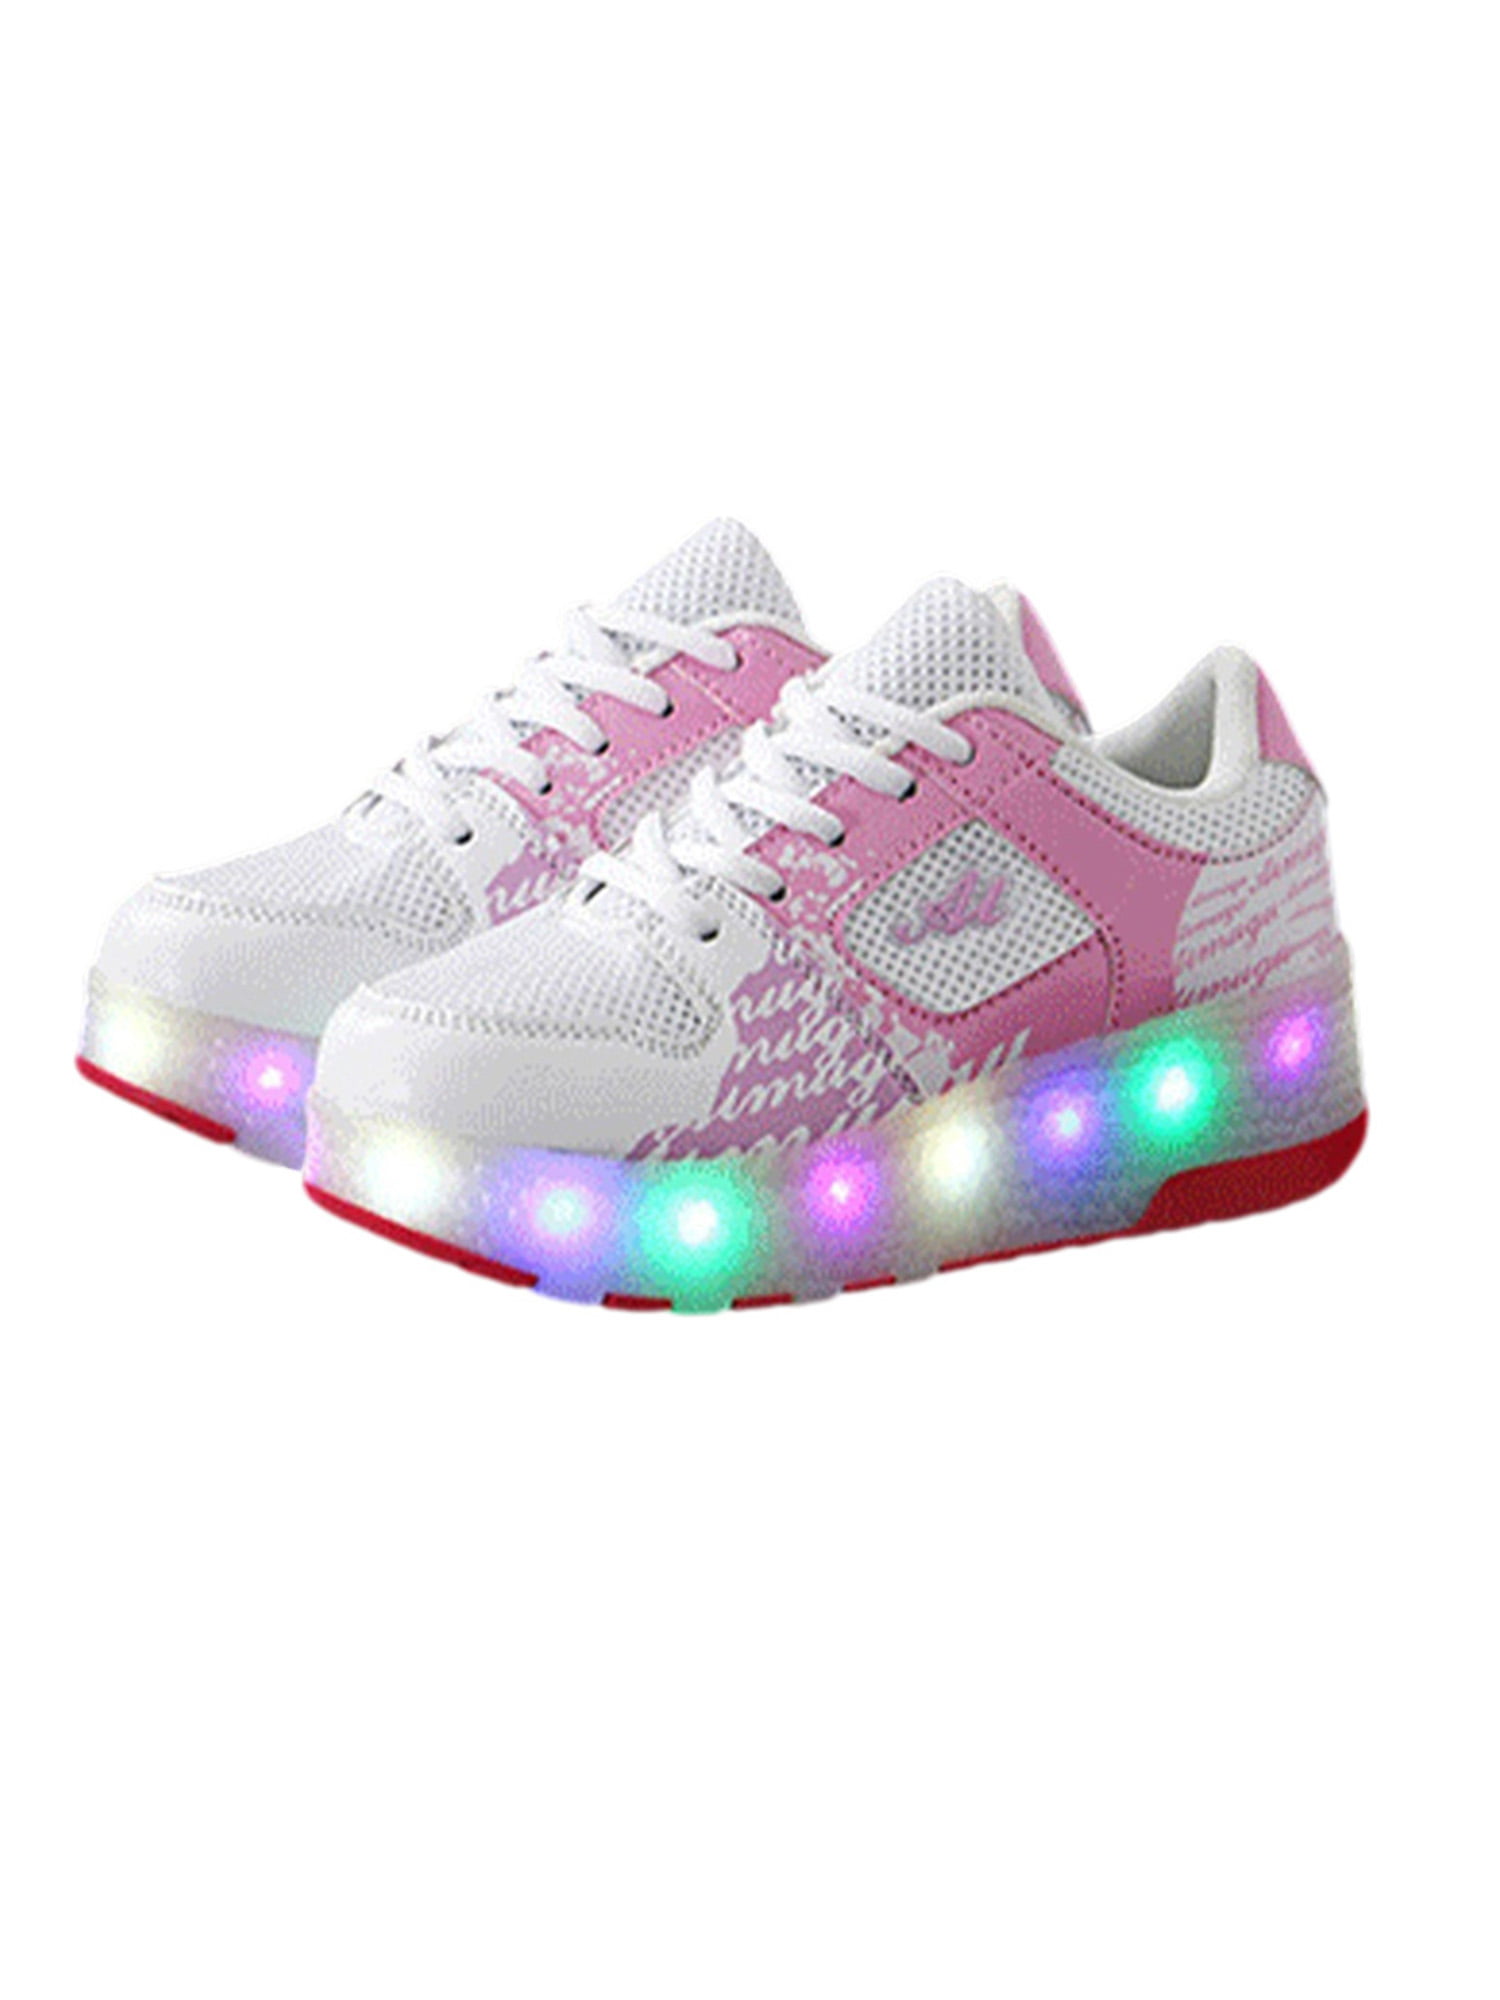 Childrens Kids Girls Pink Black Purple Sparkly Casual Shoes Trainers Size 8-2